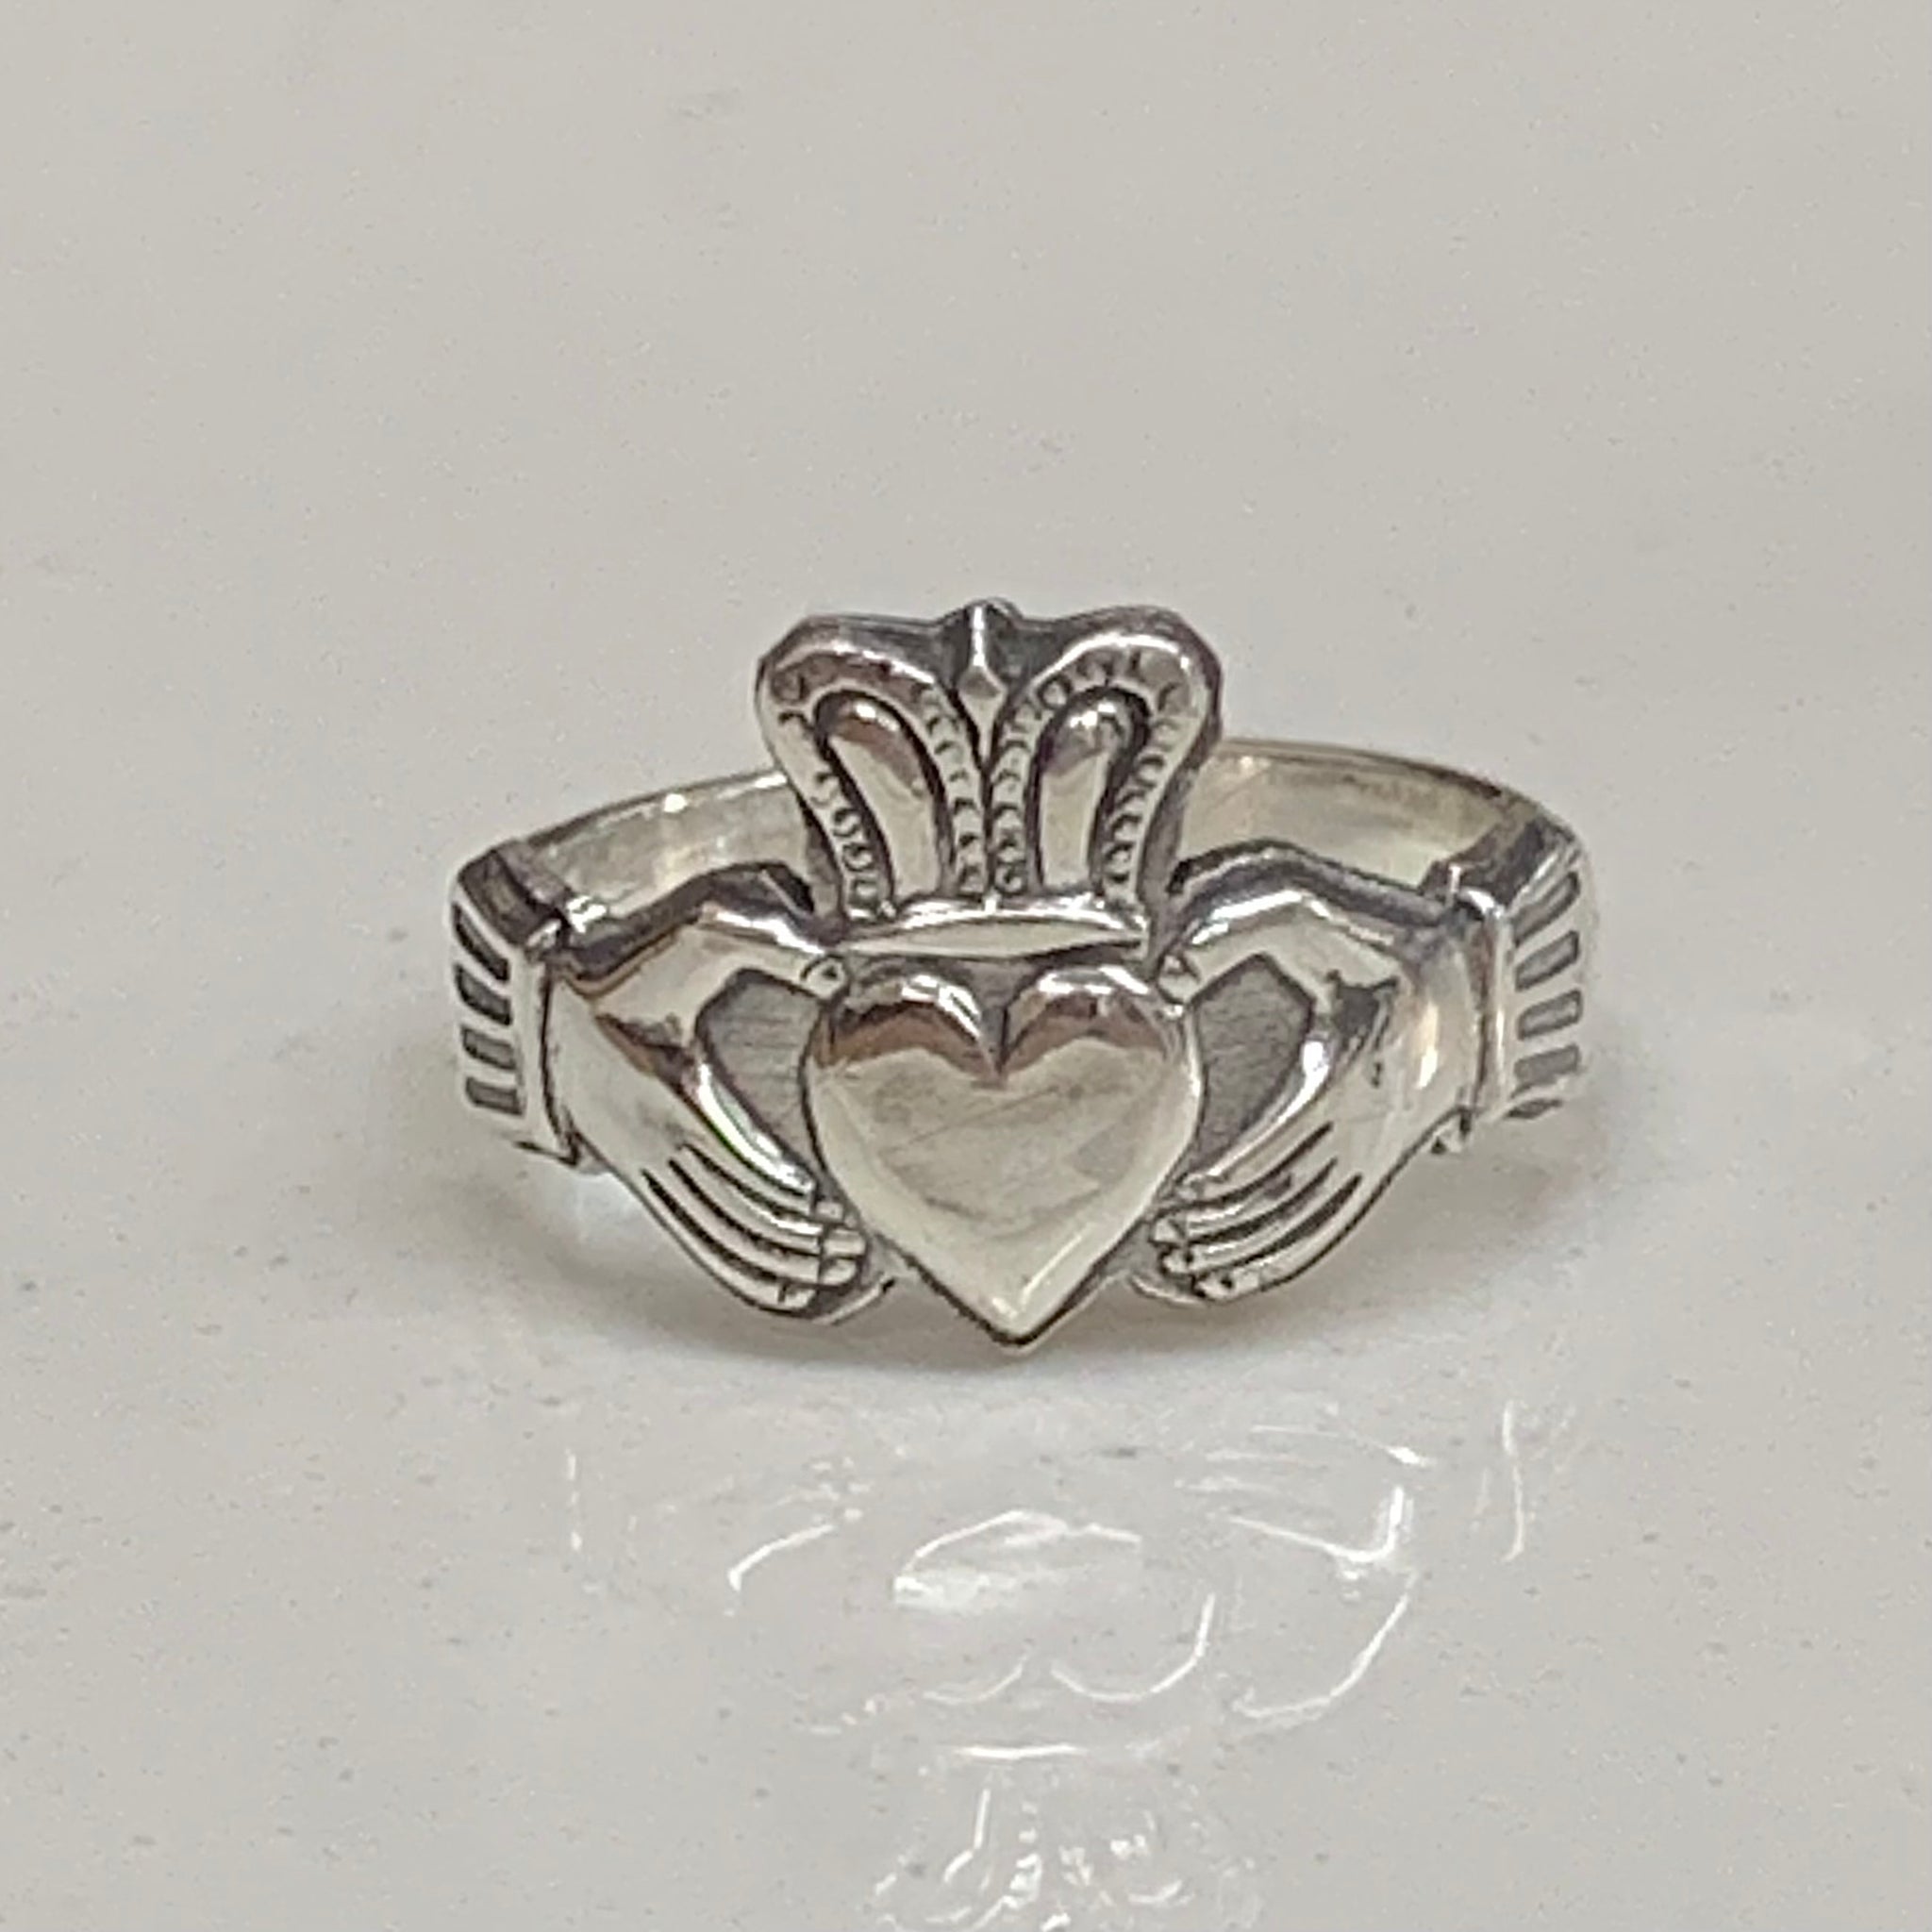 Claddagh ring in Sterling silver